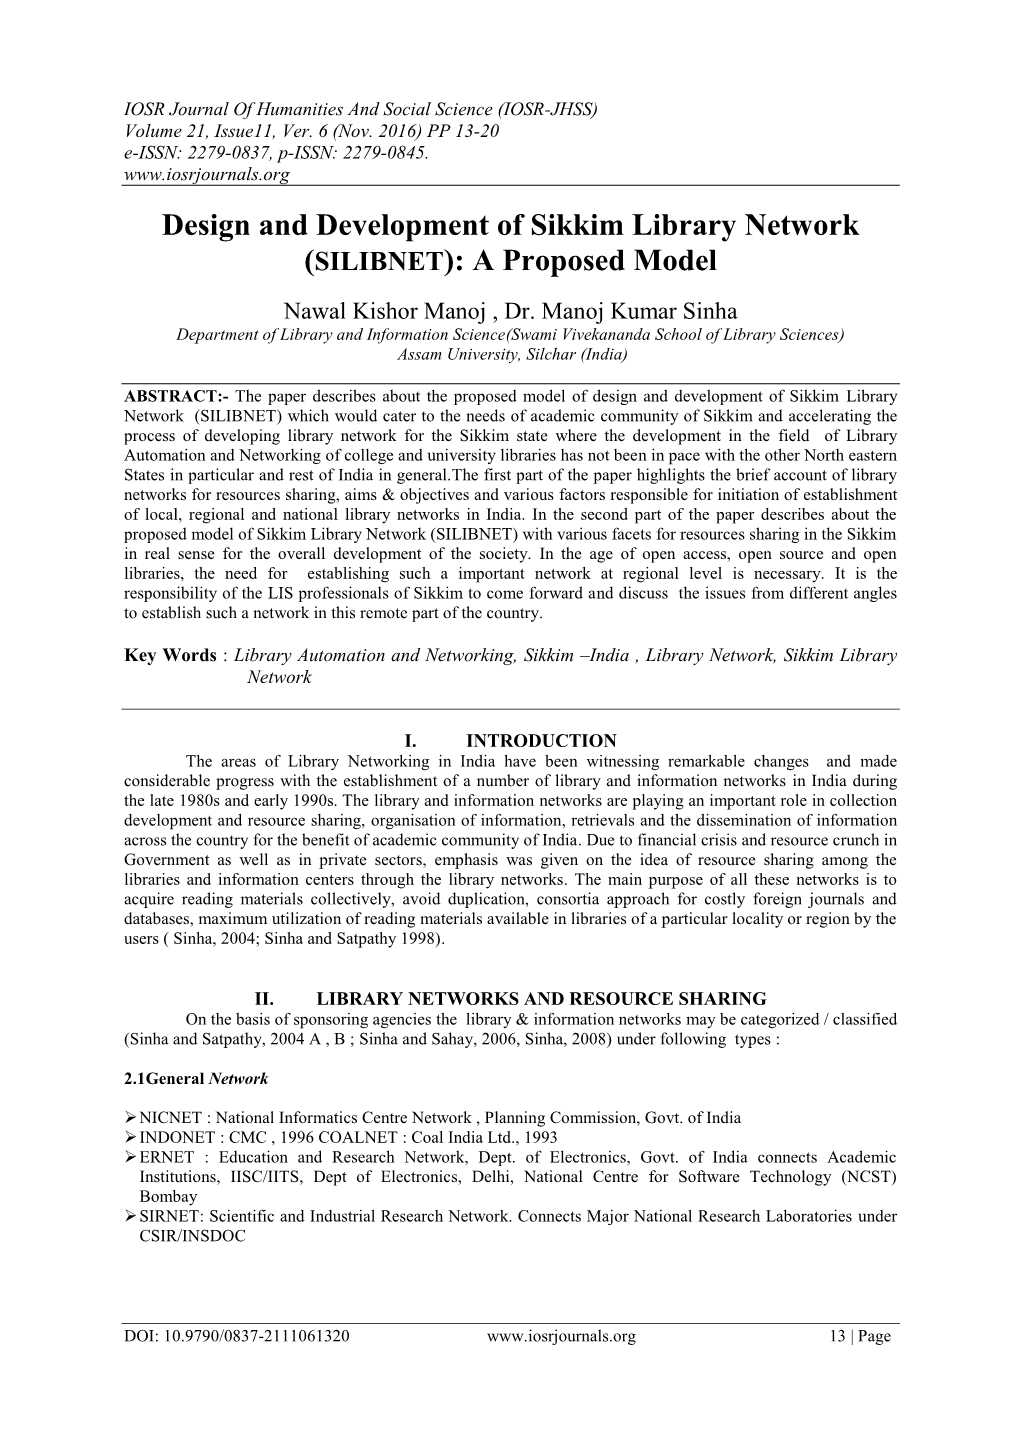 Design and Development of Sikkim Library Network (SILIBNET): a Proposed Model